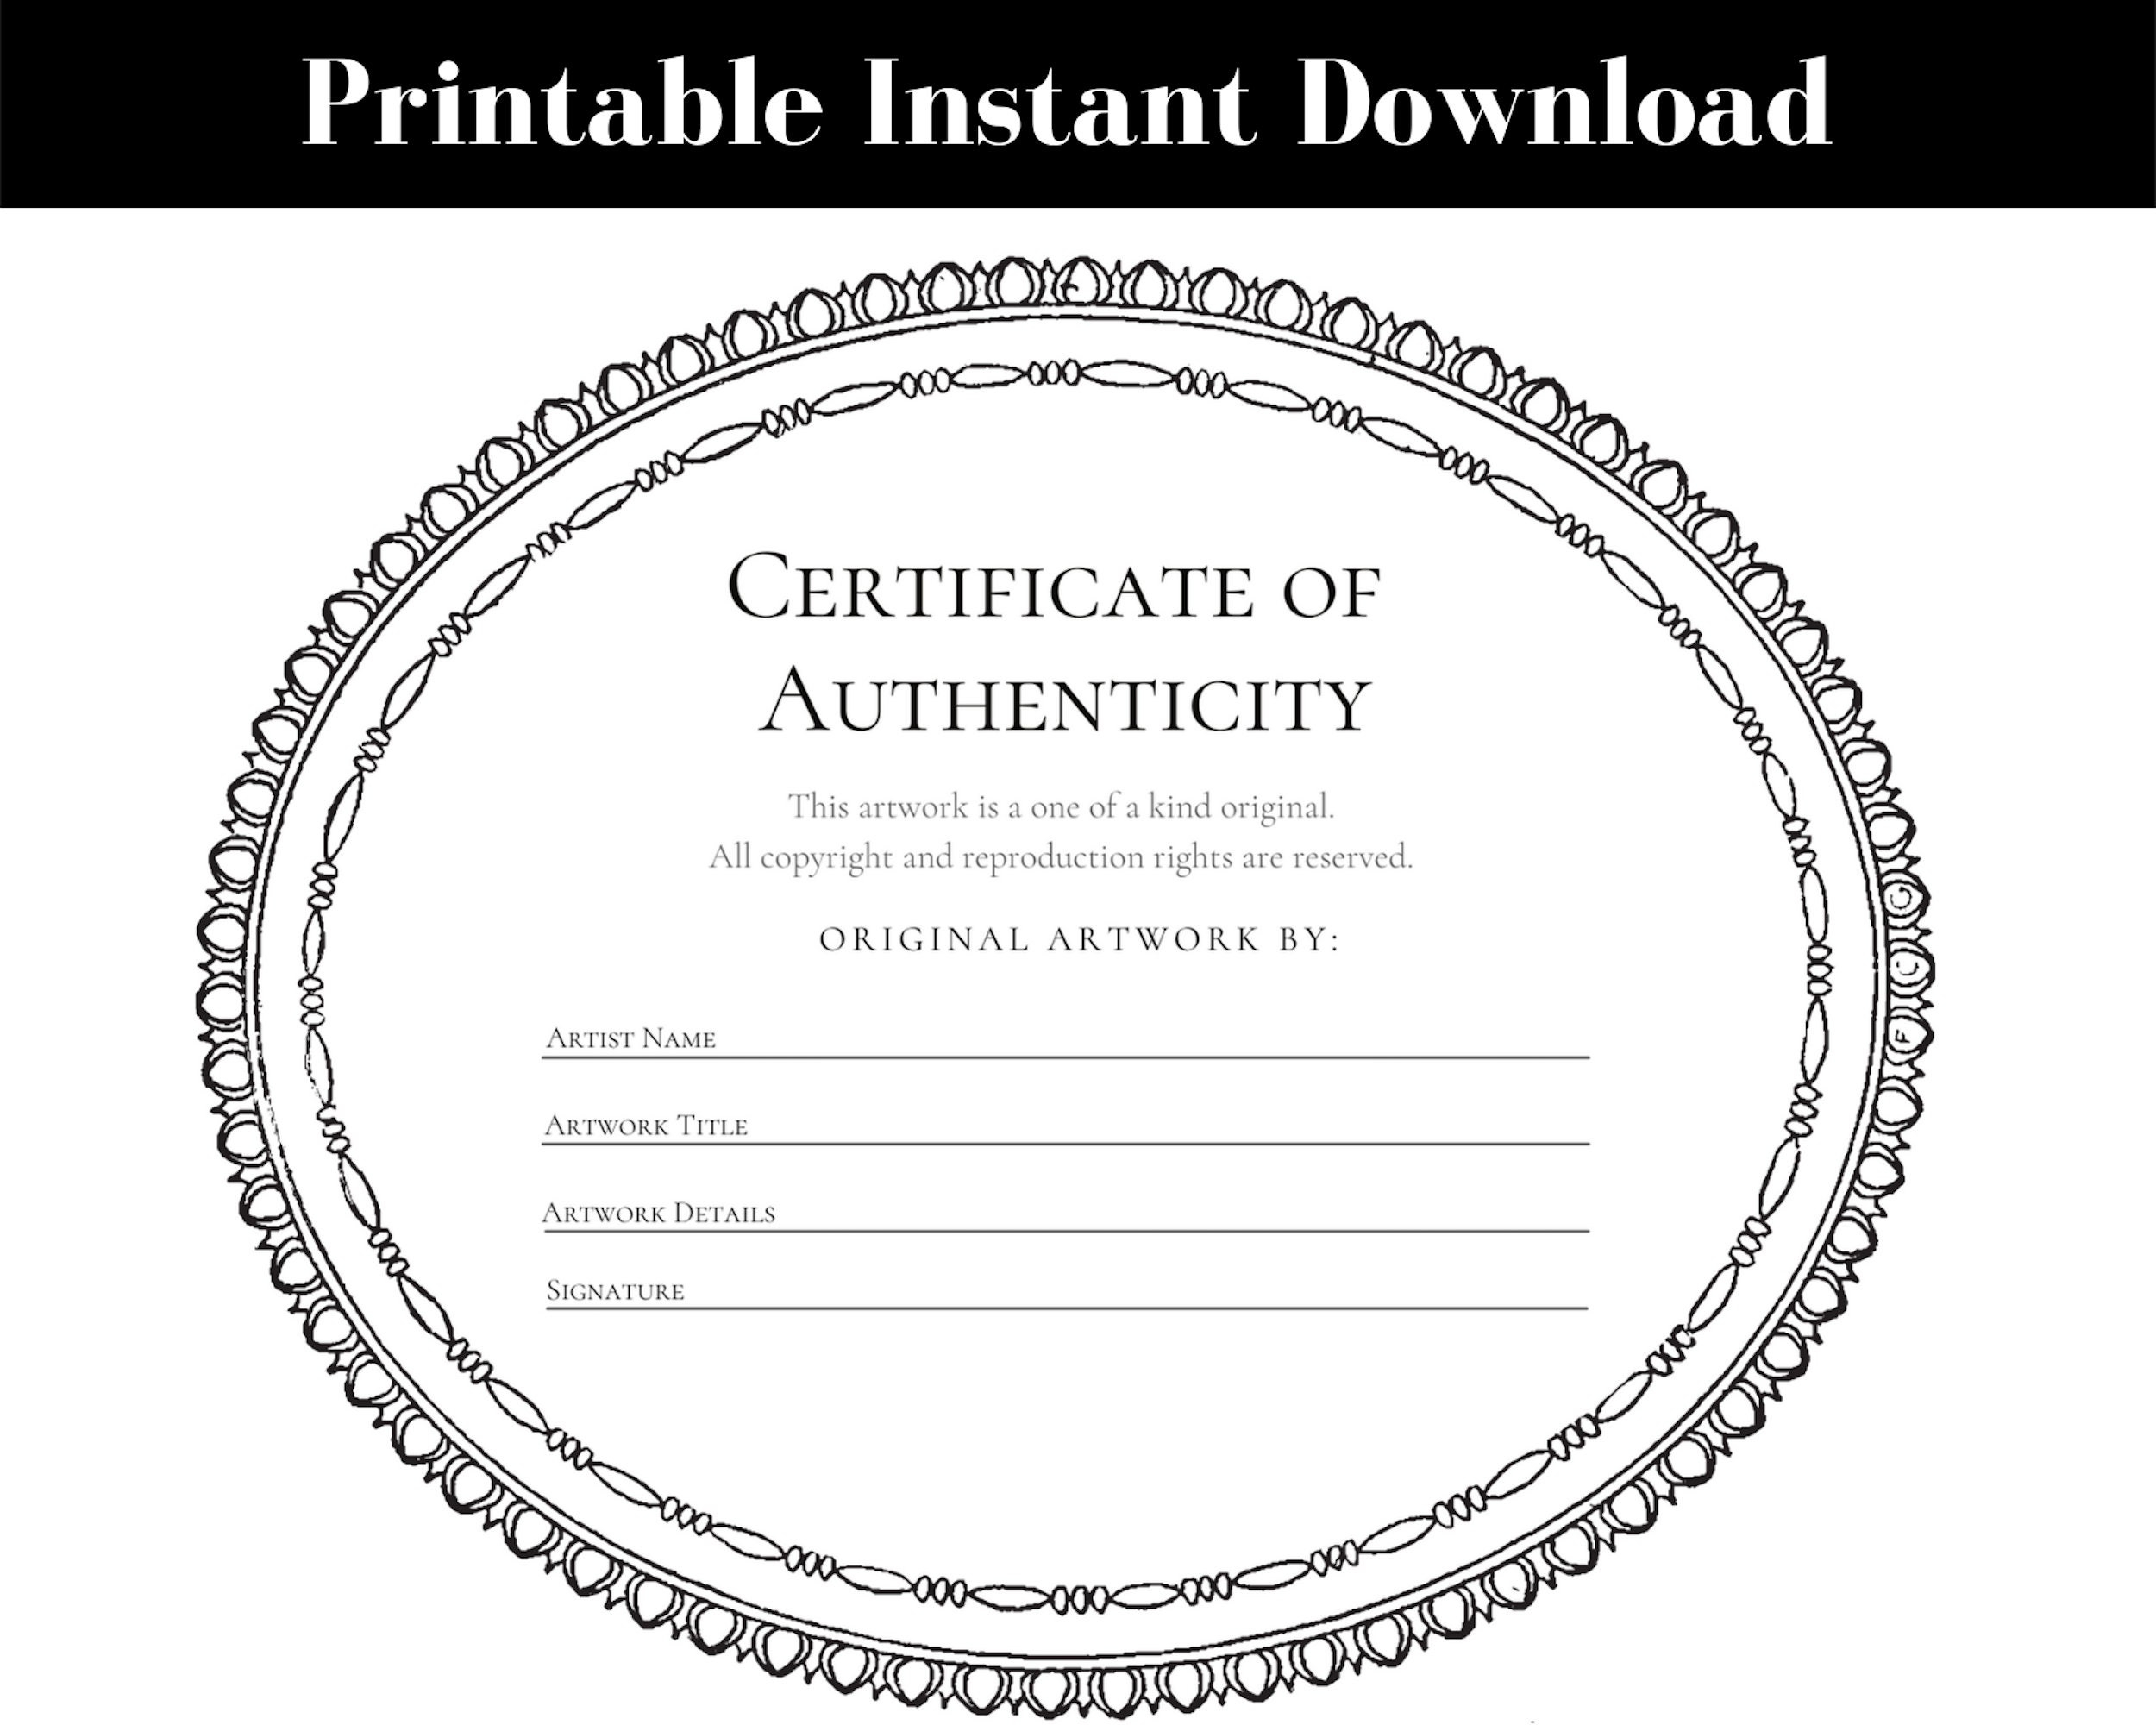 Certificate of Authenticity for Art Instant Download - Etsy